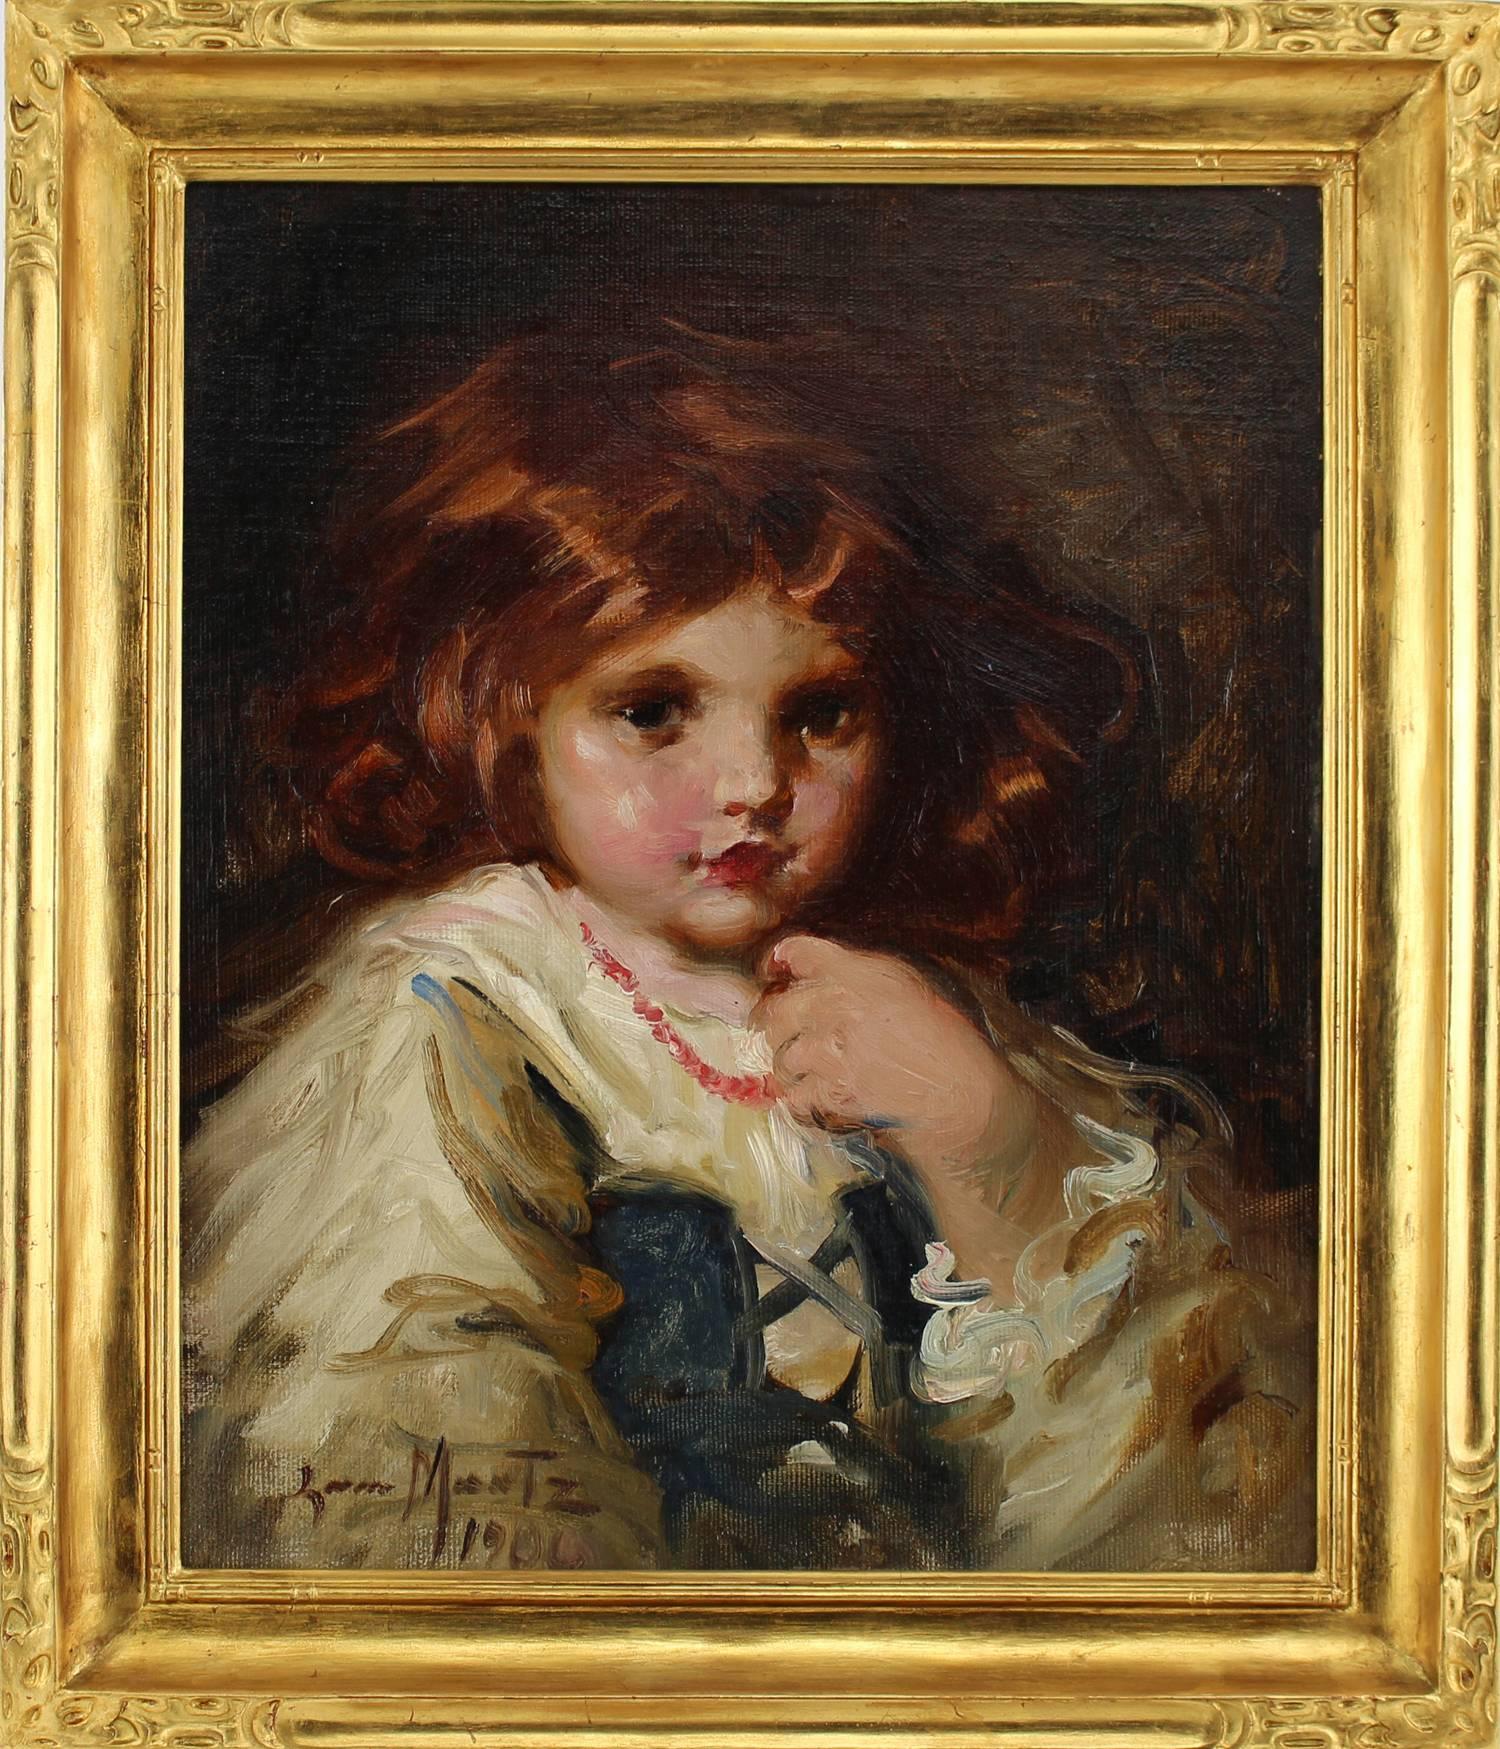 Portrait of a Little Girl 1906 - Painting by Laura Muntz Lyall